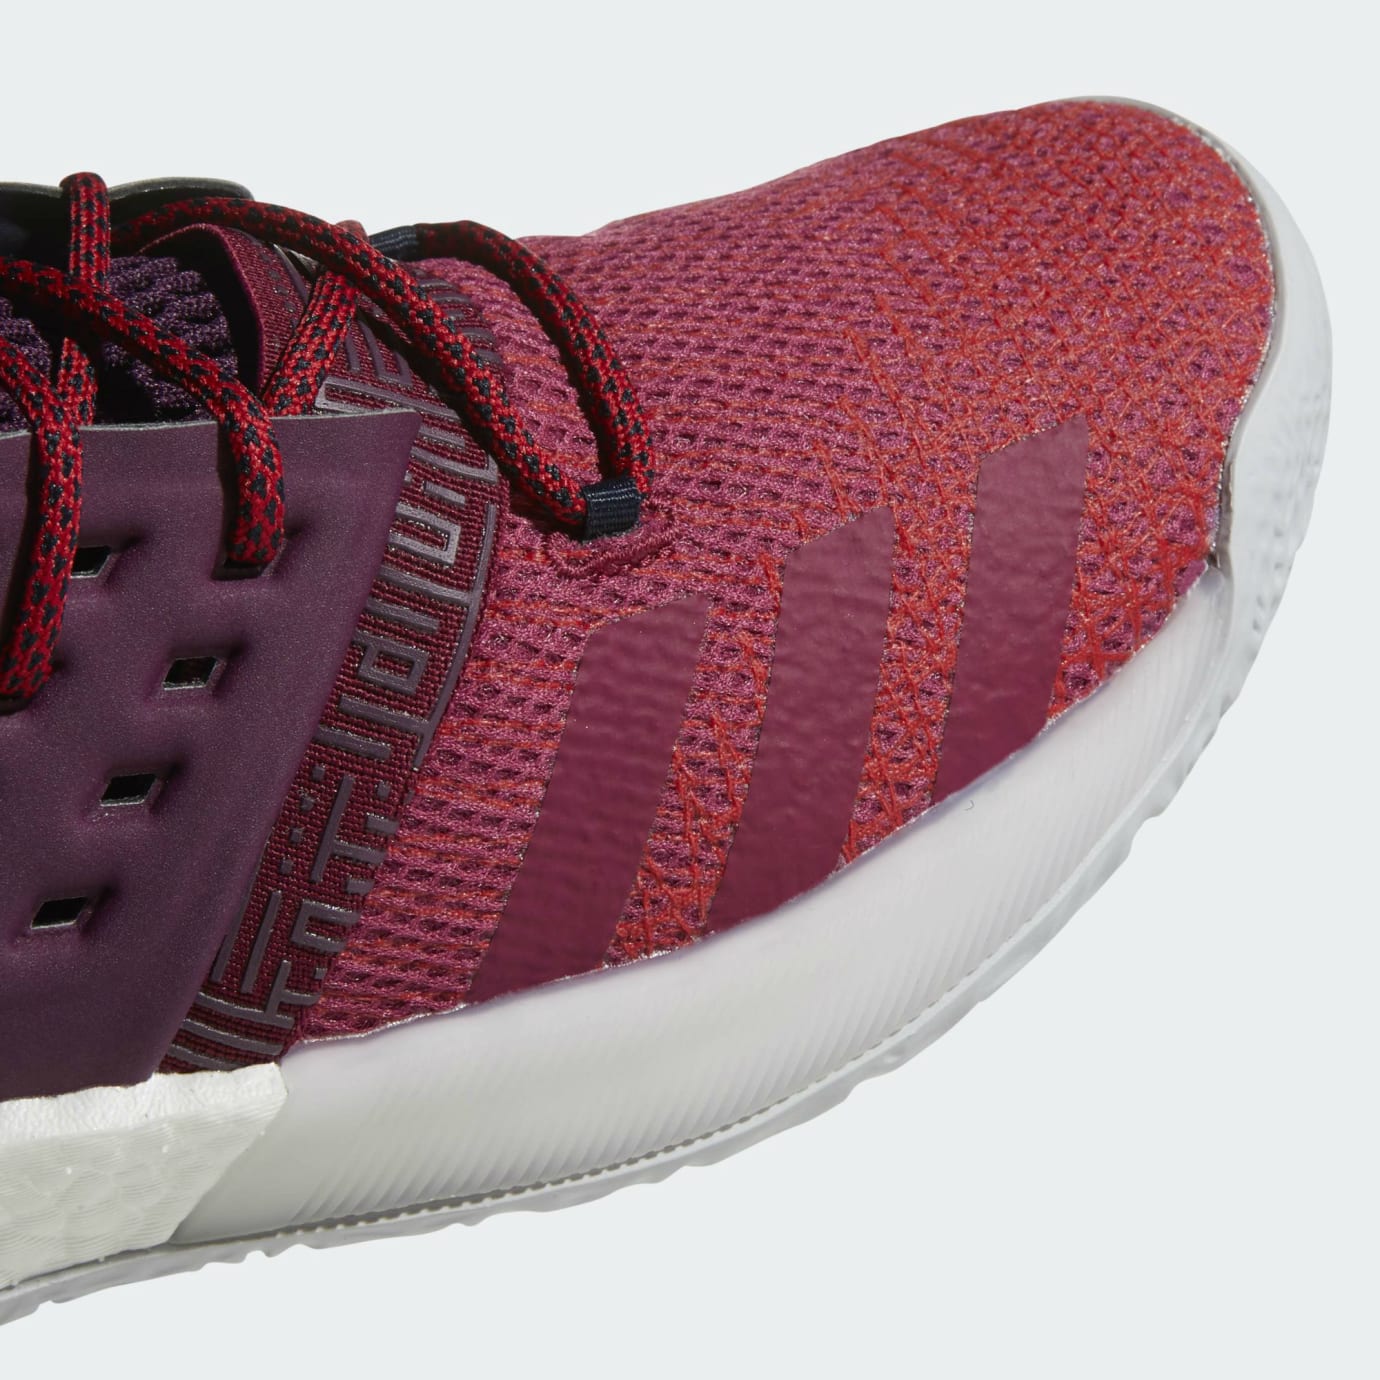 Adidas Harden 2 Maroon Release Date AH2124 Profile | Sole Collector